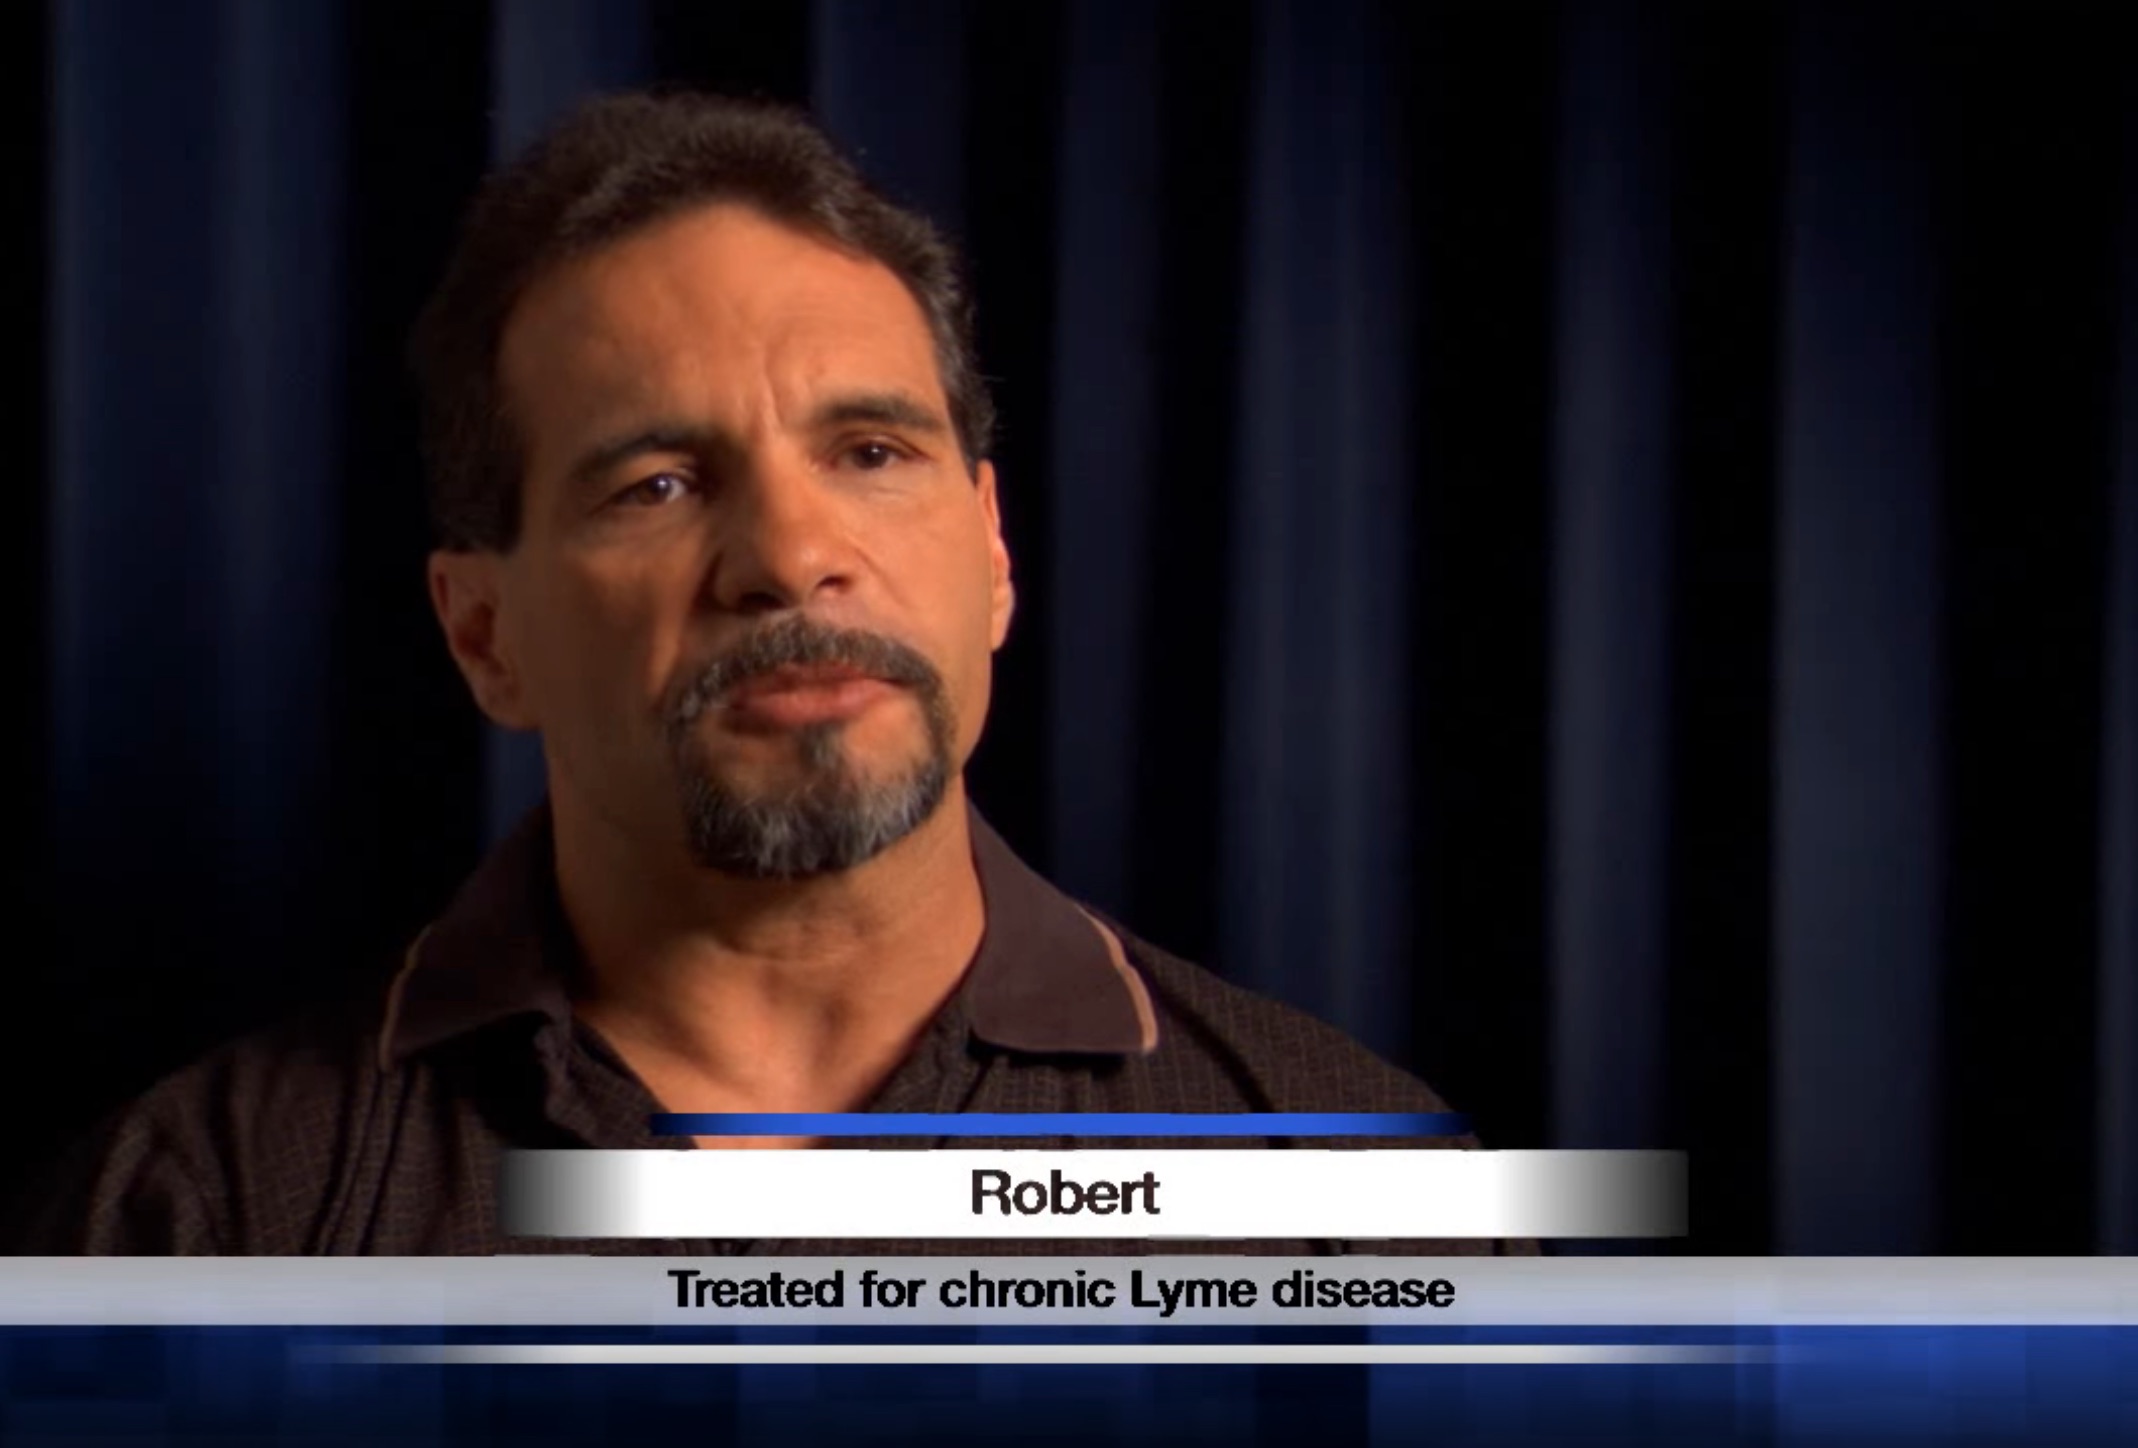 Robert- Misdiagnosed with Chronic Lyme Disease